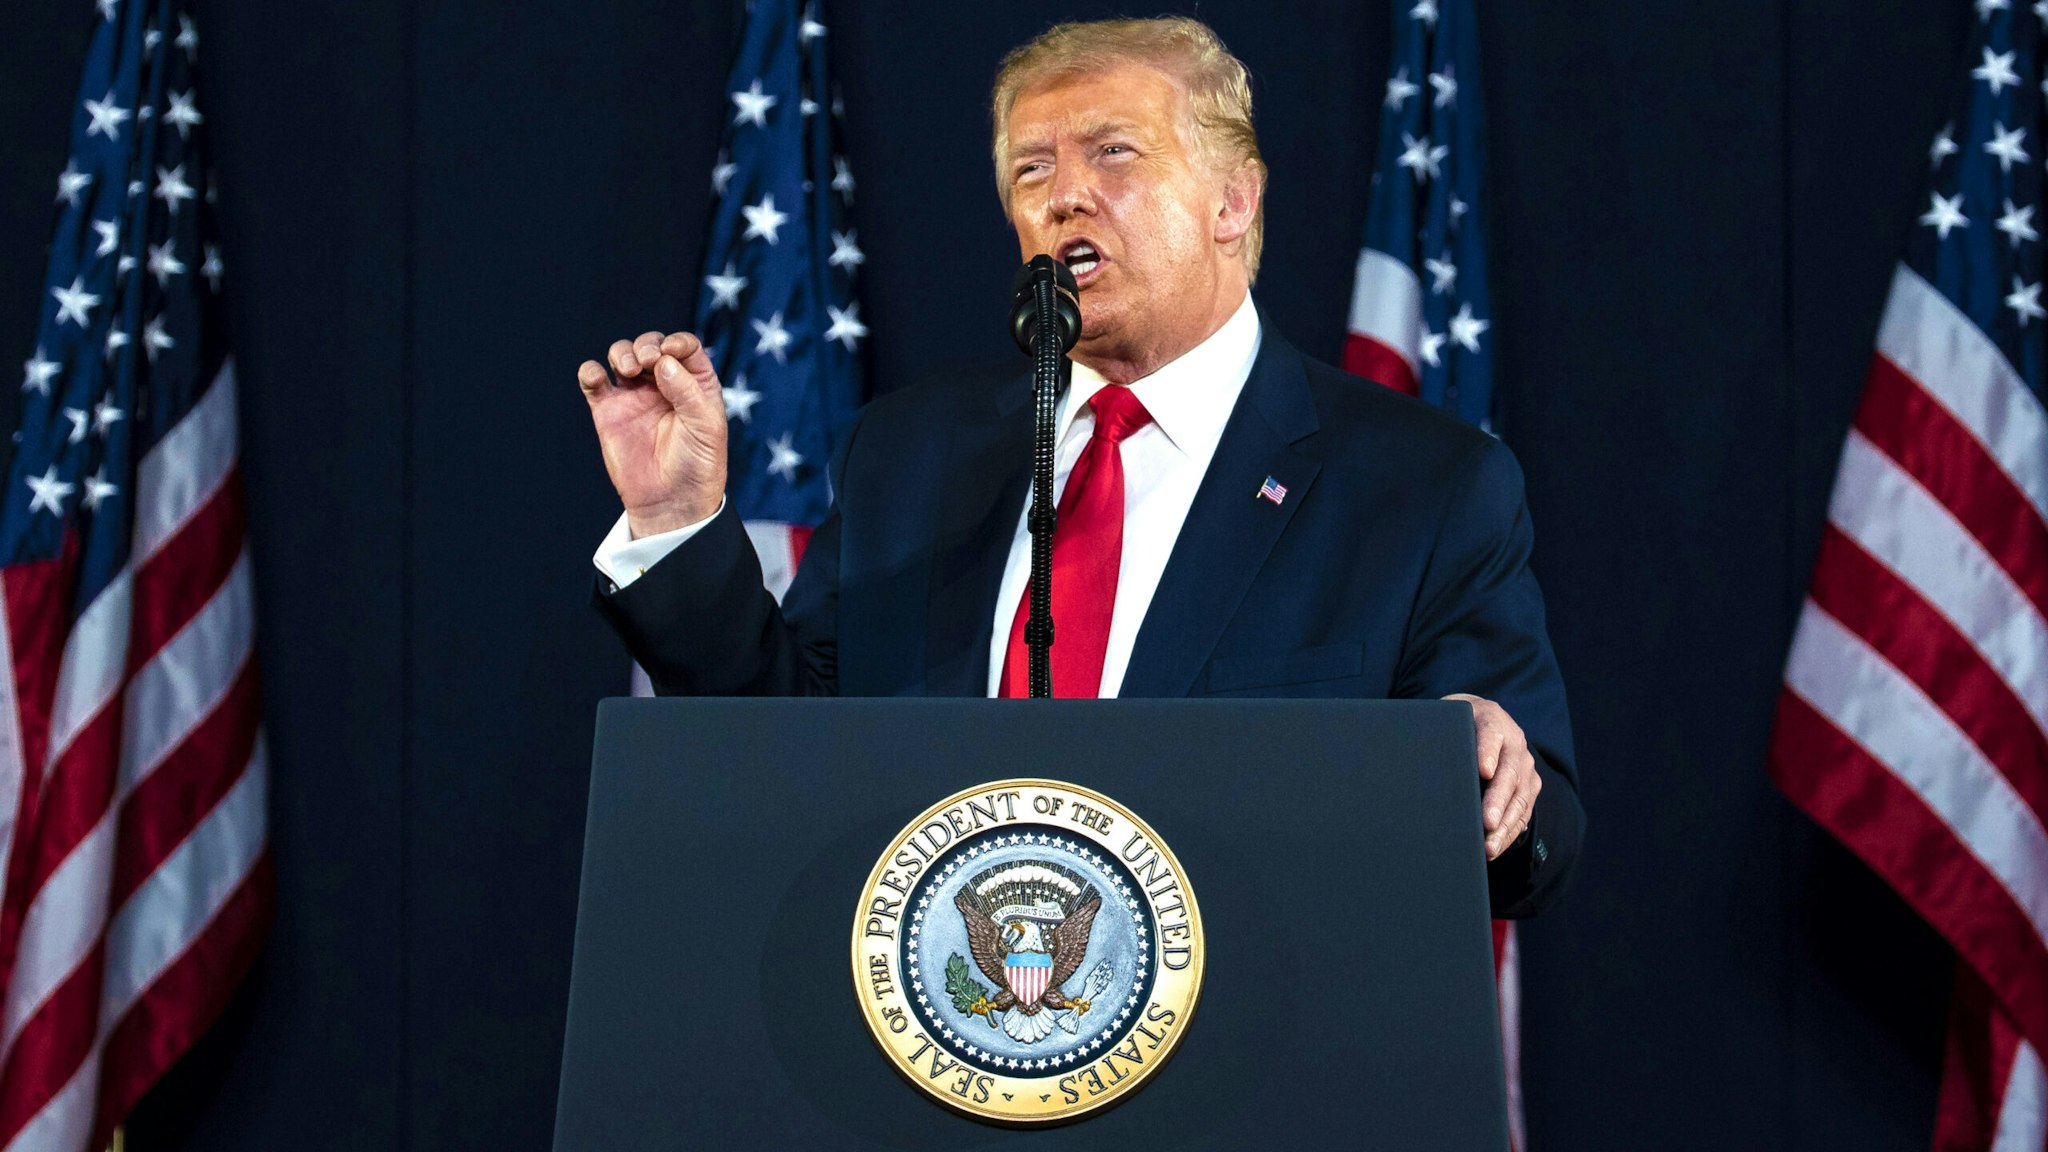 U.S. President Donald Trump speaks during an event at Mount Rushmore National Memorial in Keystone, South Dakota, U.S., on Friday, July 3, 2020. The early Independence Day celebration, which will feature a military flyover and the first fireworks in more than a decade, is expected to include about 7,500 ticketed guests who won't be required to wear masks or socially distance despite a spike in U.S. coronavirus cases.